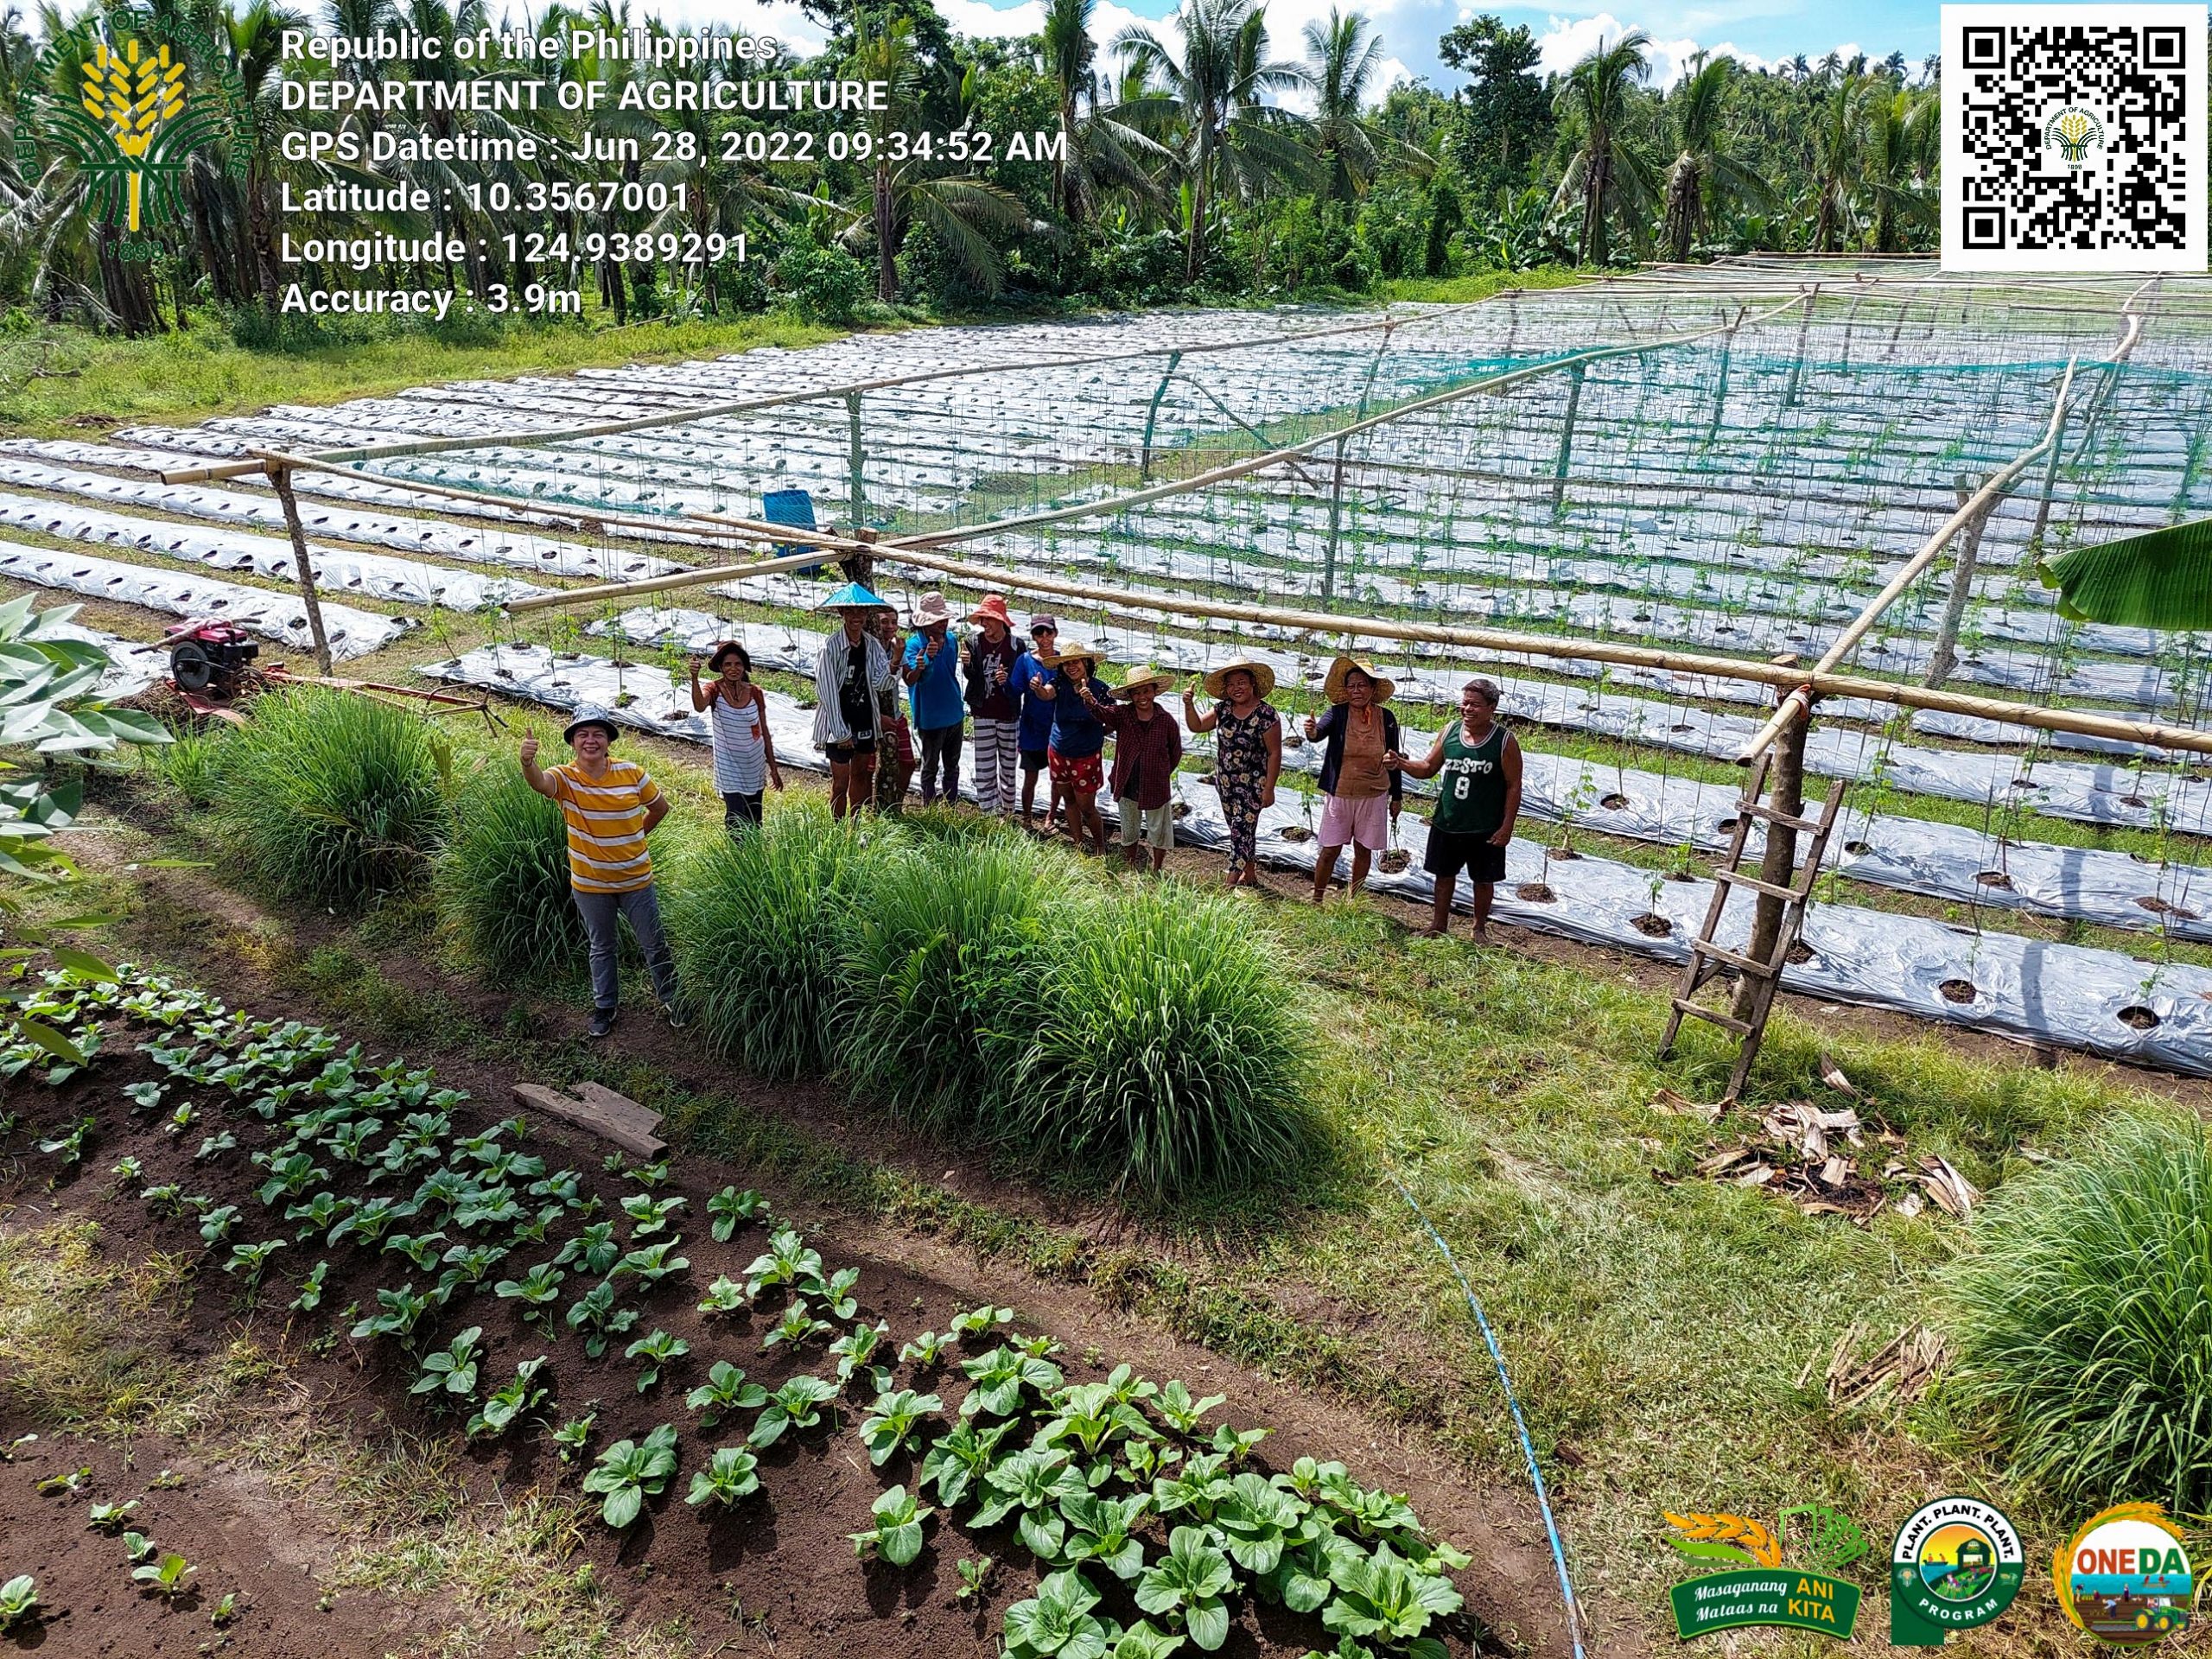 Southern Leyte vegetable farmers’ resiliency amid typhoons proves fruitful